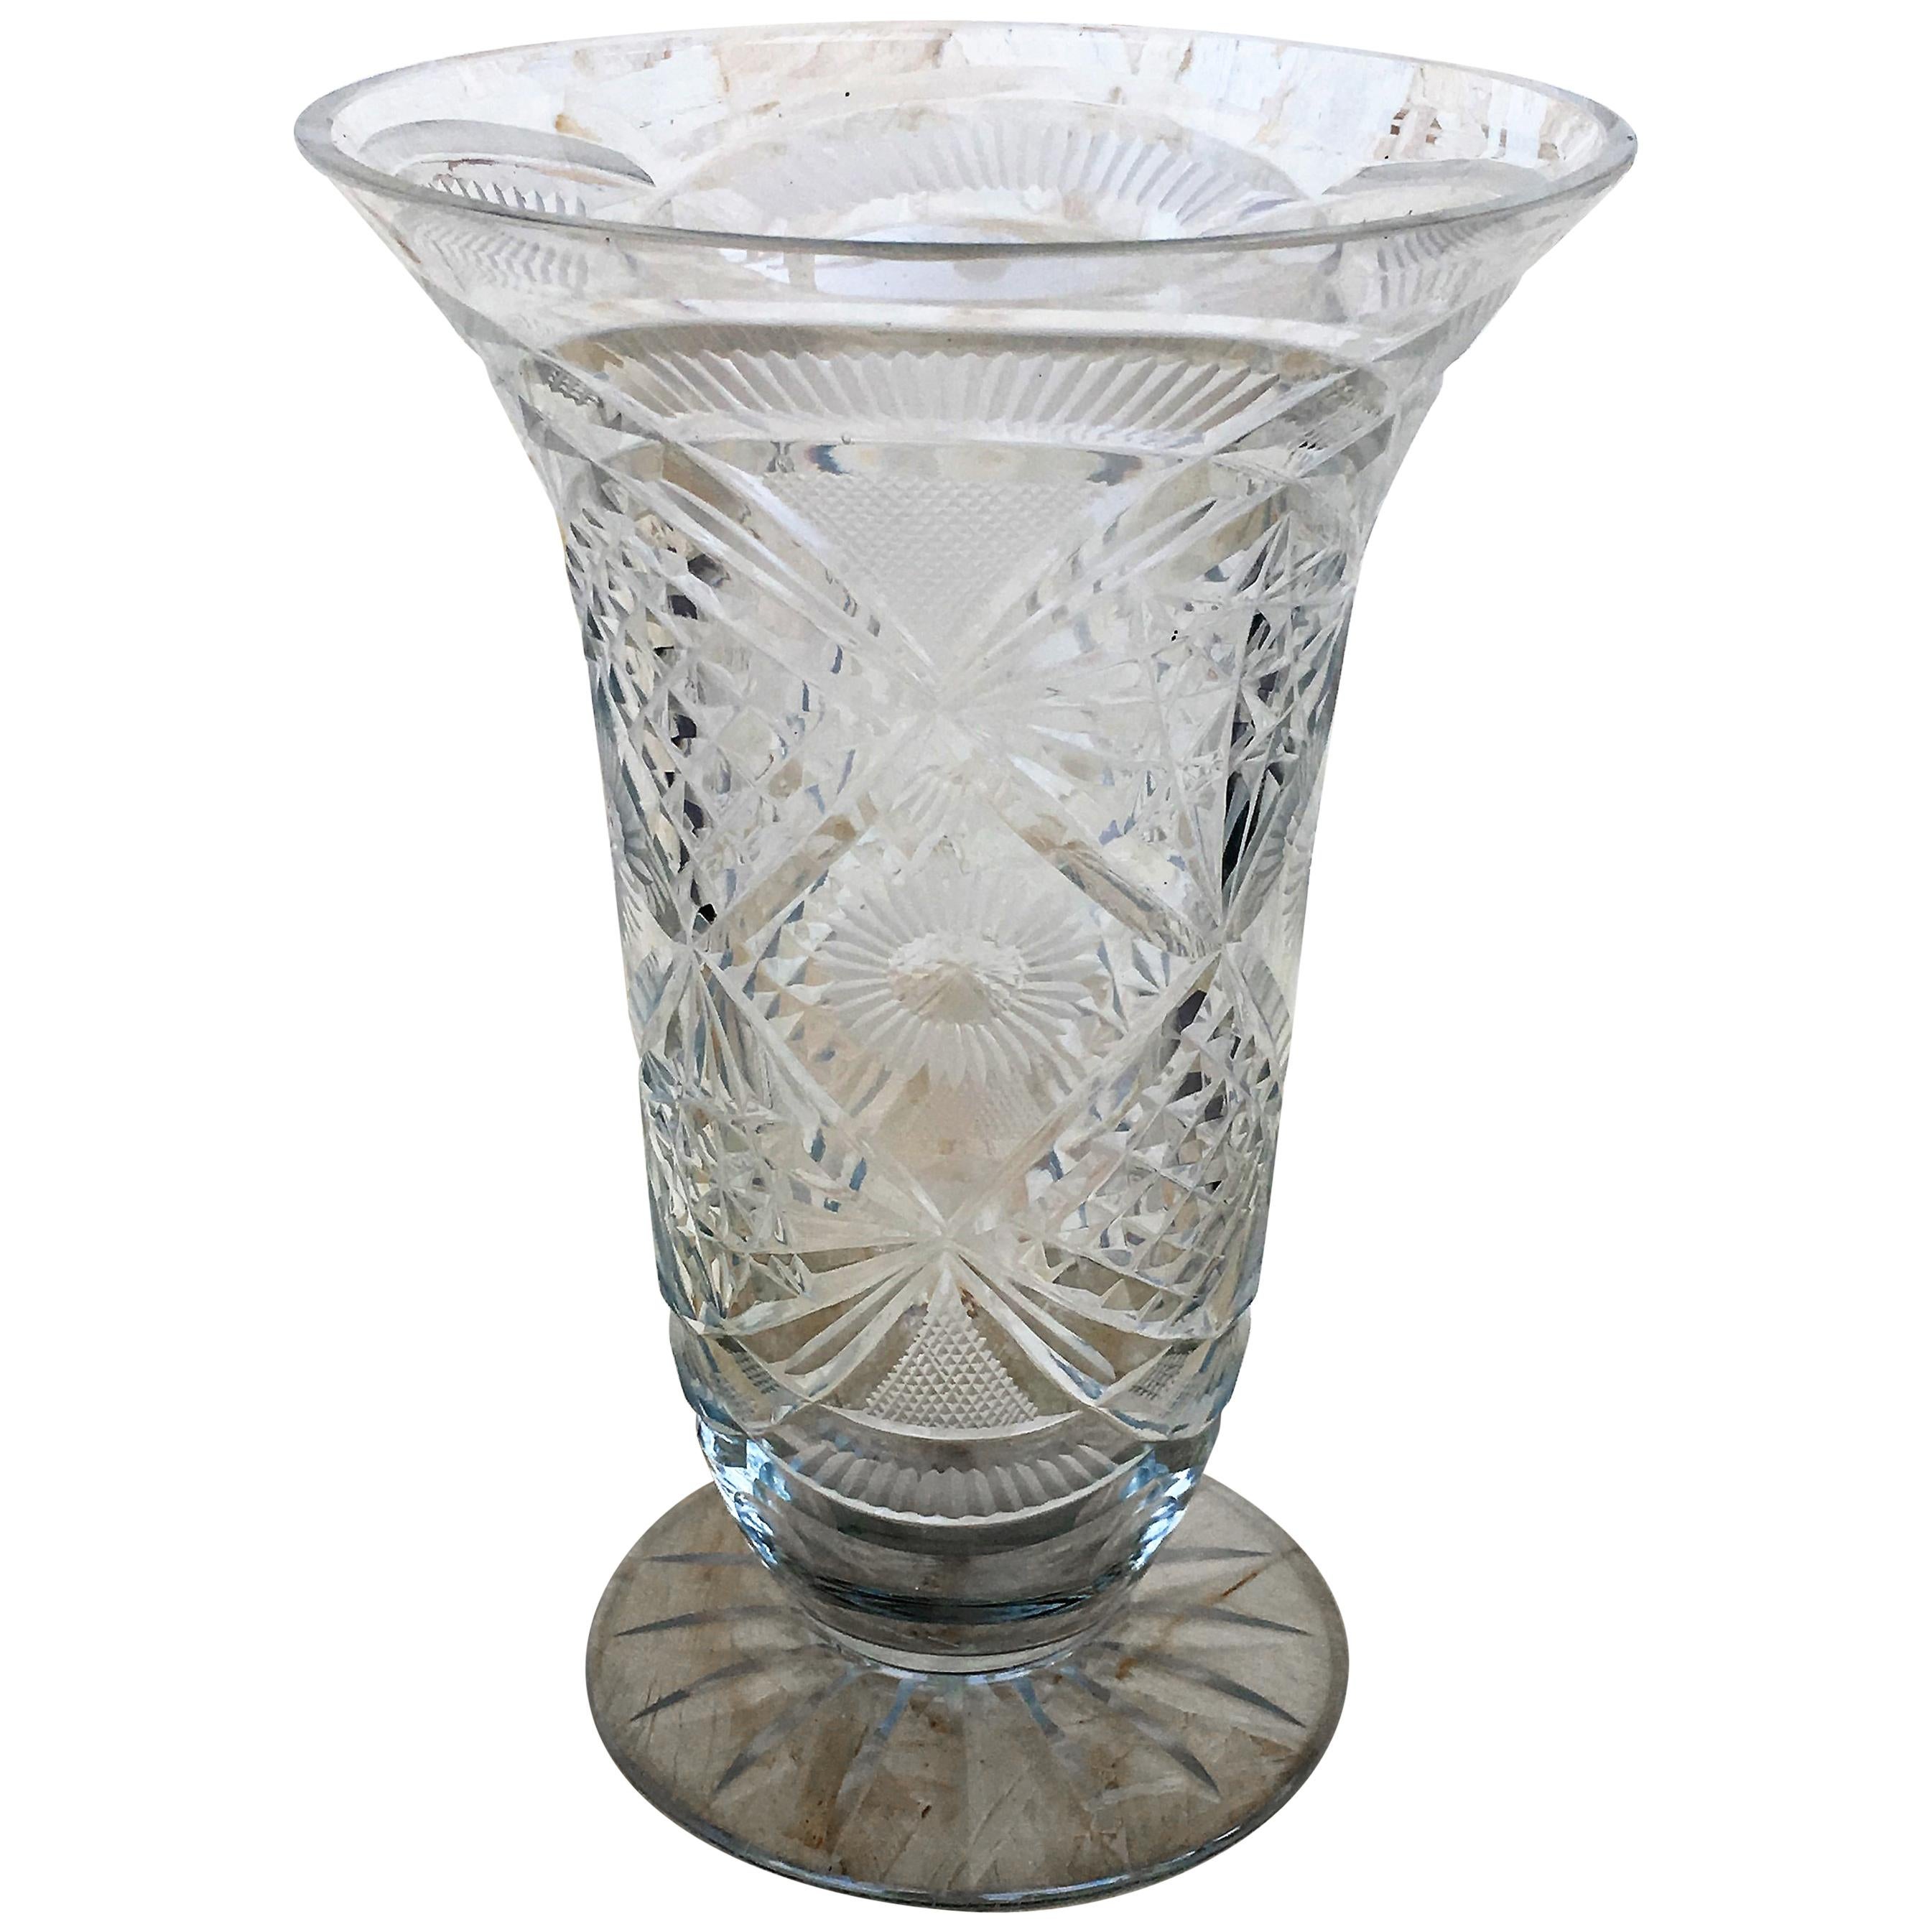 20th Century Art Deco Etched Carved Glass Vase with Ornamental Motifs